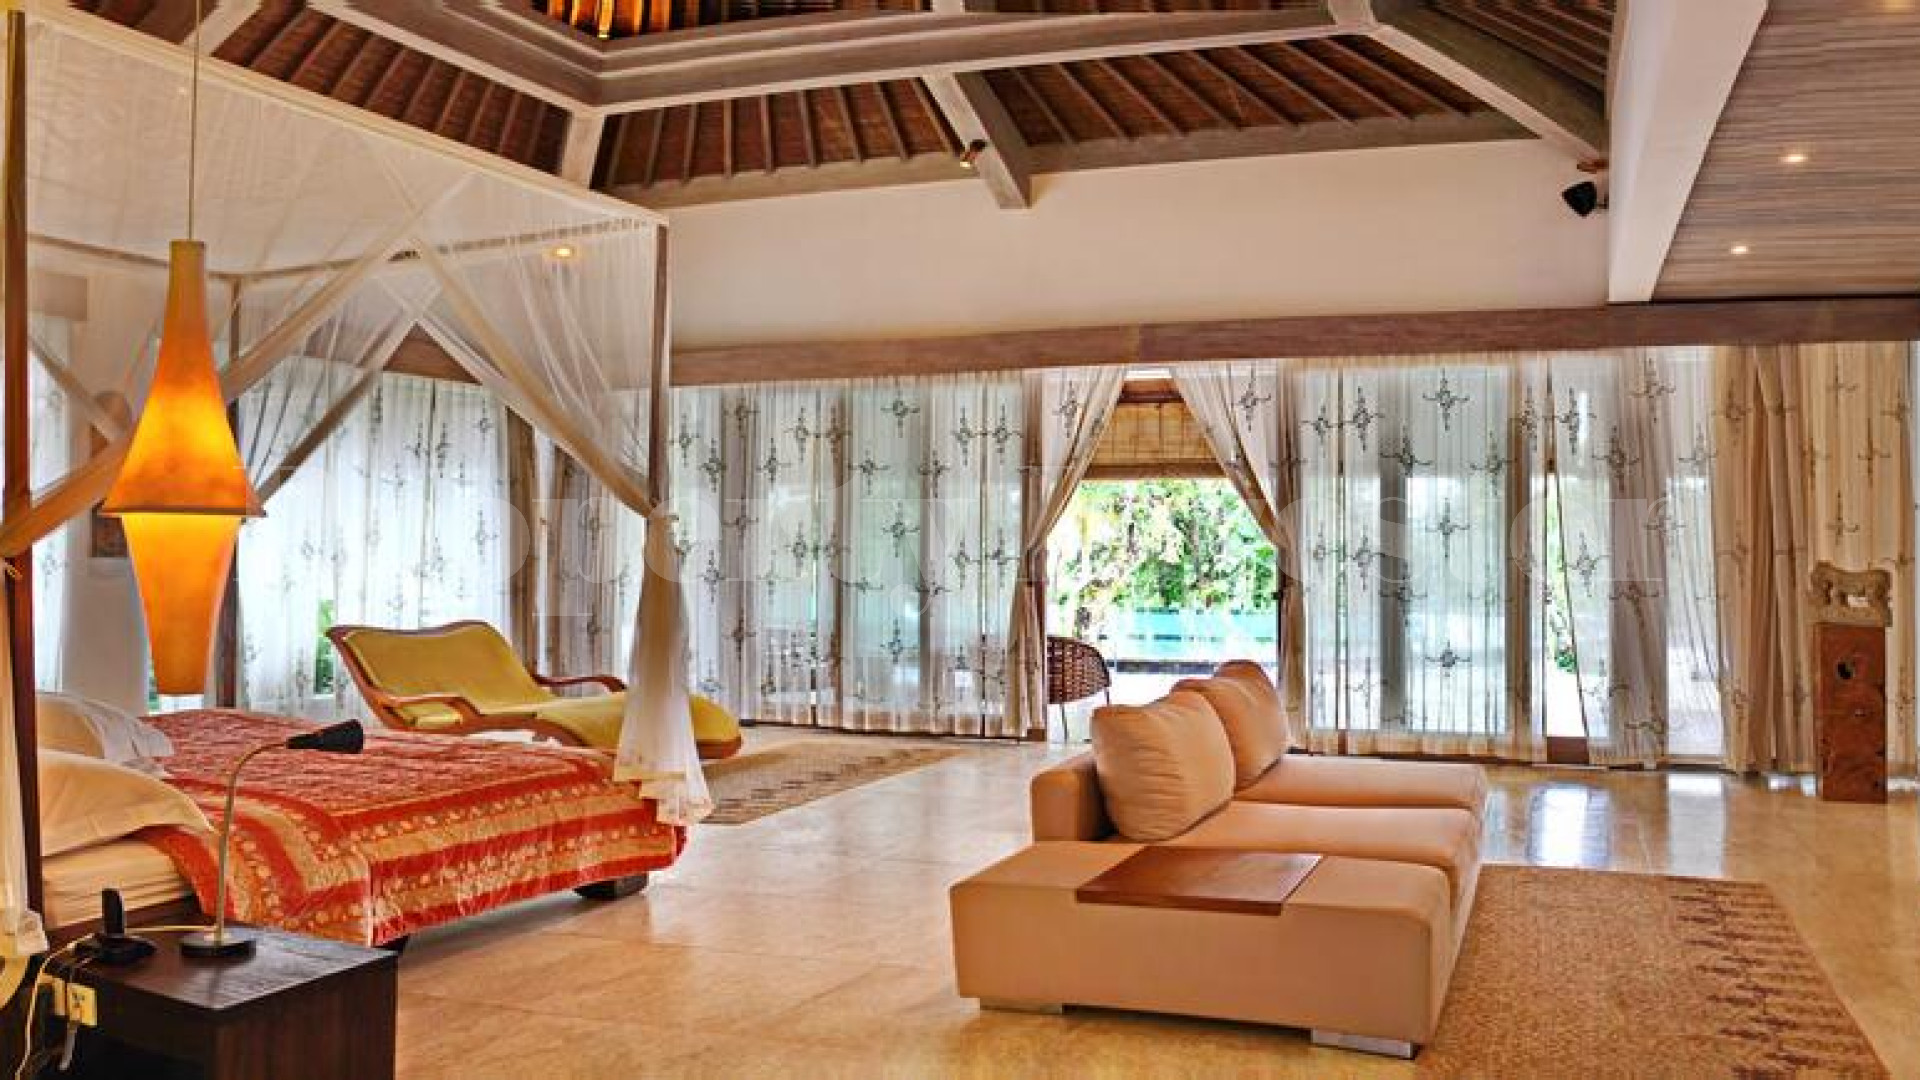 Exotic 4* Boutique Hotel & Spa with 26 Rooms & Villas in Ubud, Bali